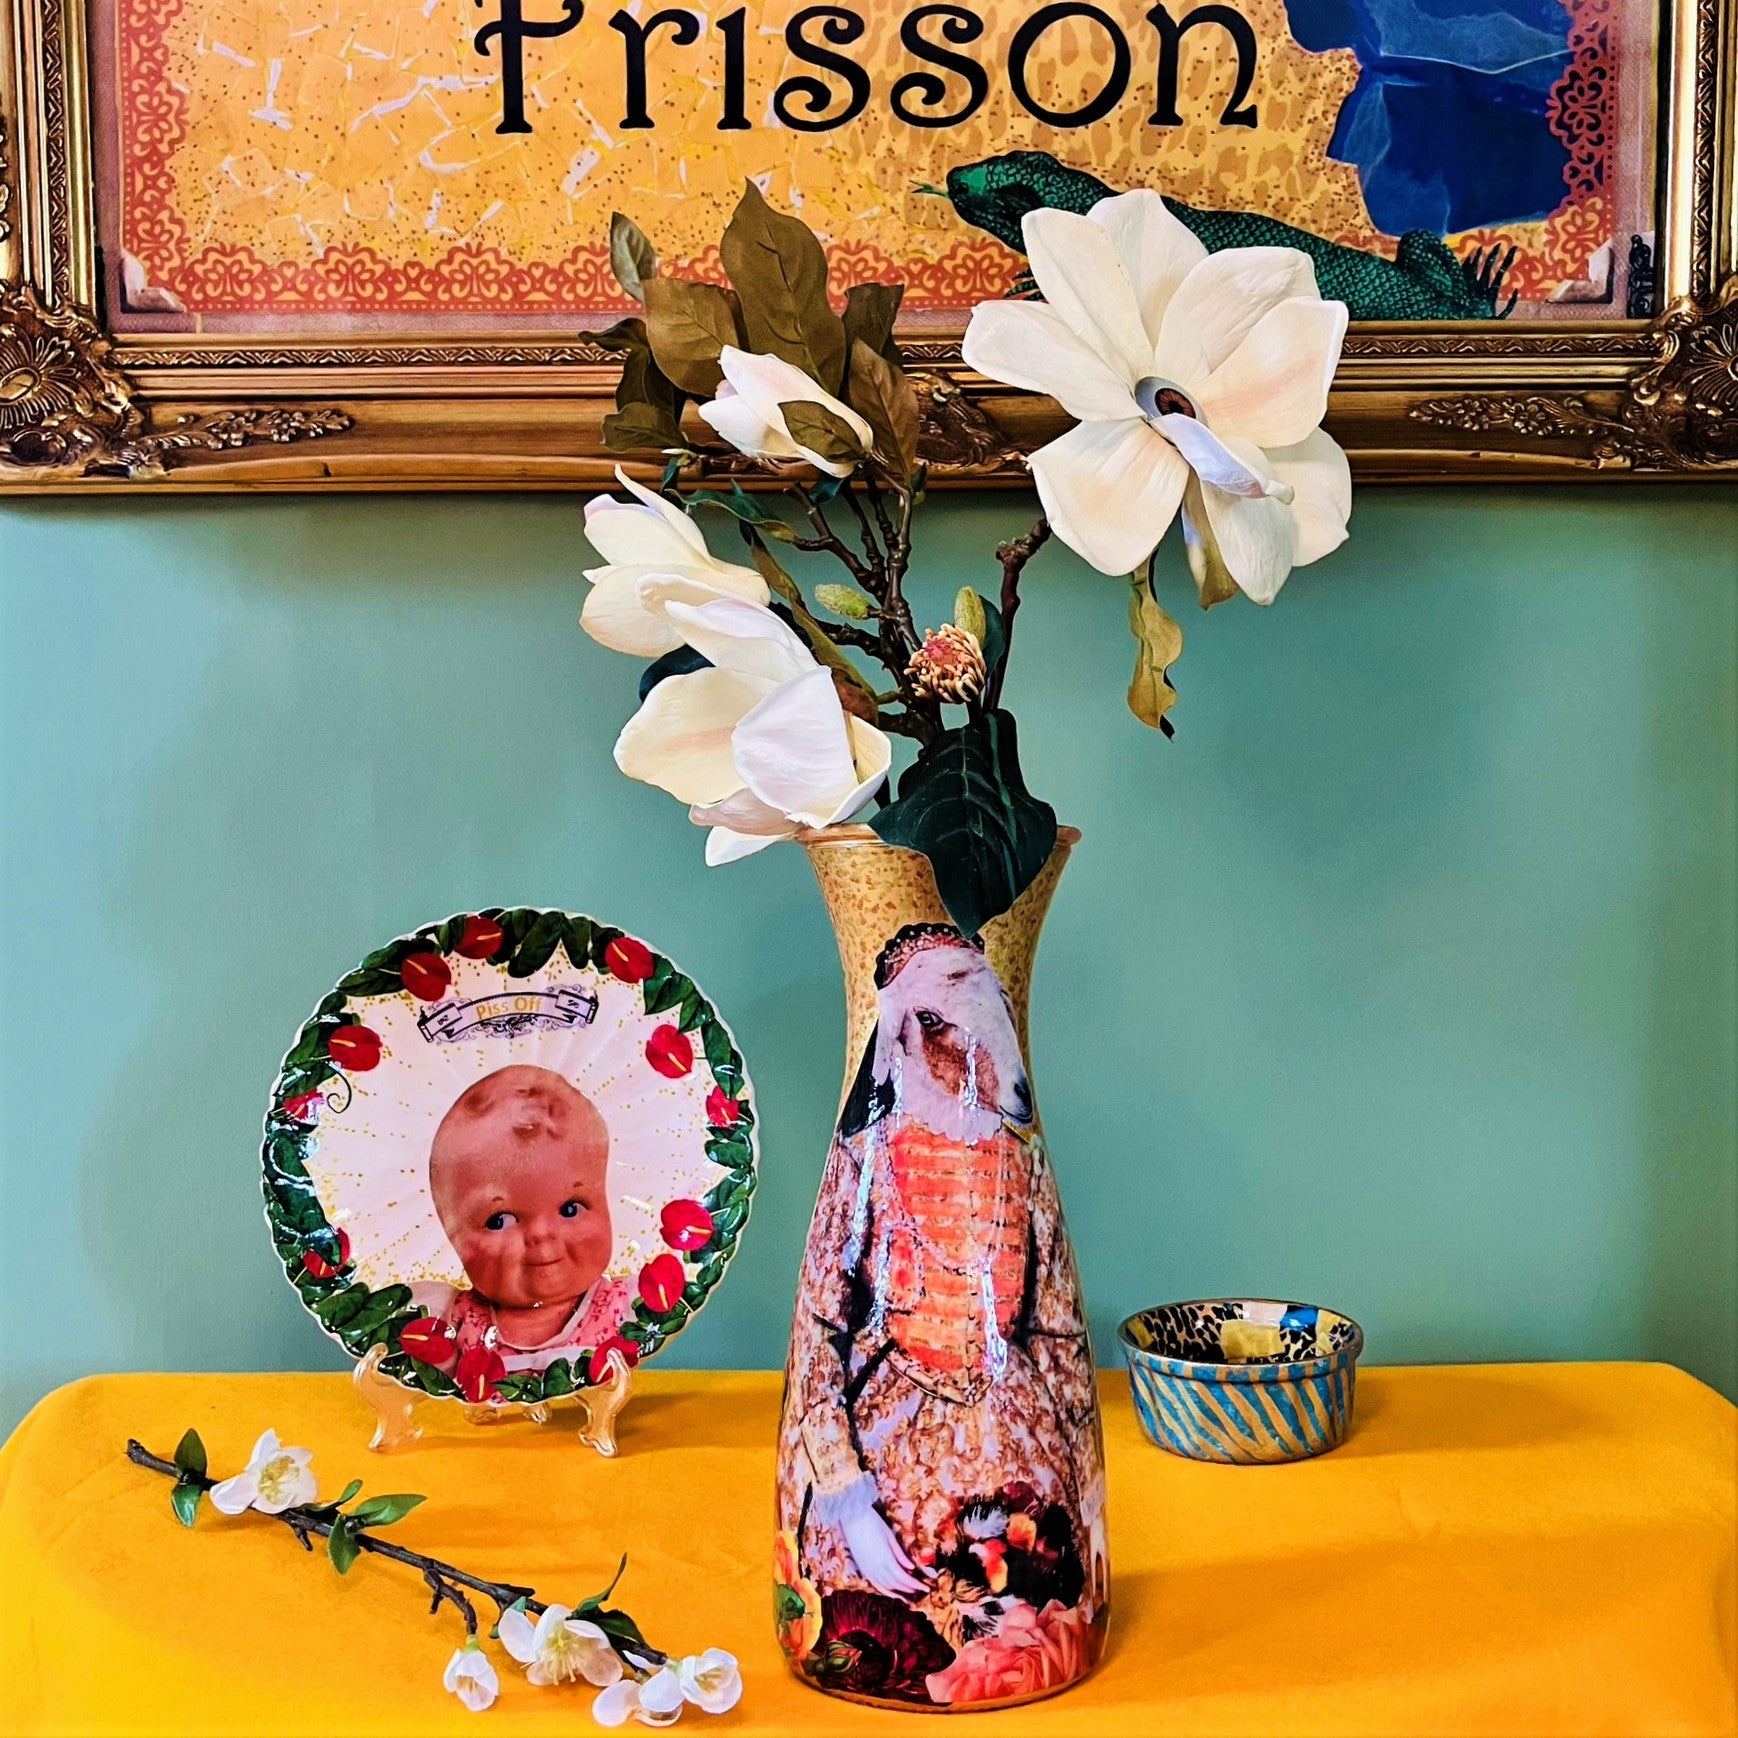 "Be Nice Or Get Lost" Flower Vase by House of Frisson, featuring collage of Queen Elizabeth I with a goat head, on a gold background. Vase displayed on a table with other objects.